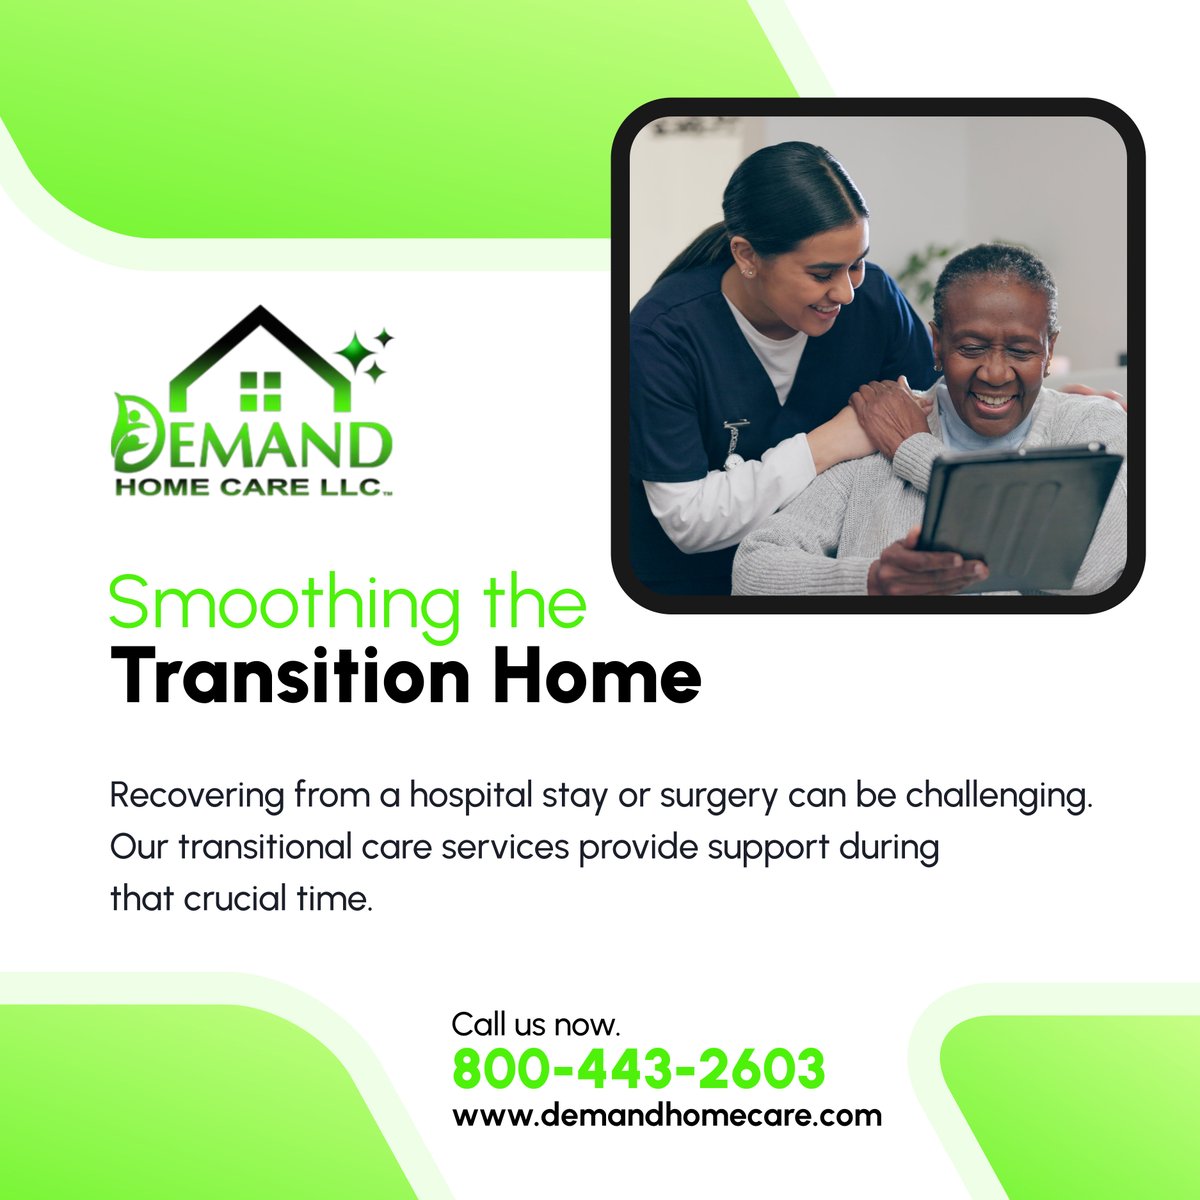 Focus on healing, not the transition home! Our transitional care services offer support after a hospital stay or surgery. Need assistance? Give us a ring at (800) 443-2603! 

#TaylorMI #HomeCare #TransitionalCare #PostHospitalCare #SeniorAssistance